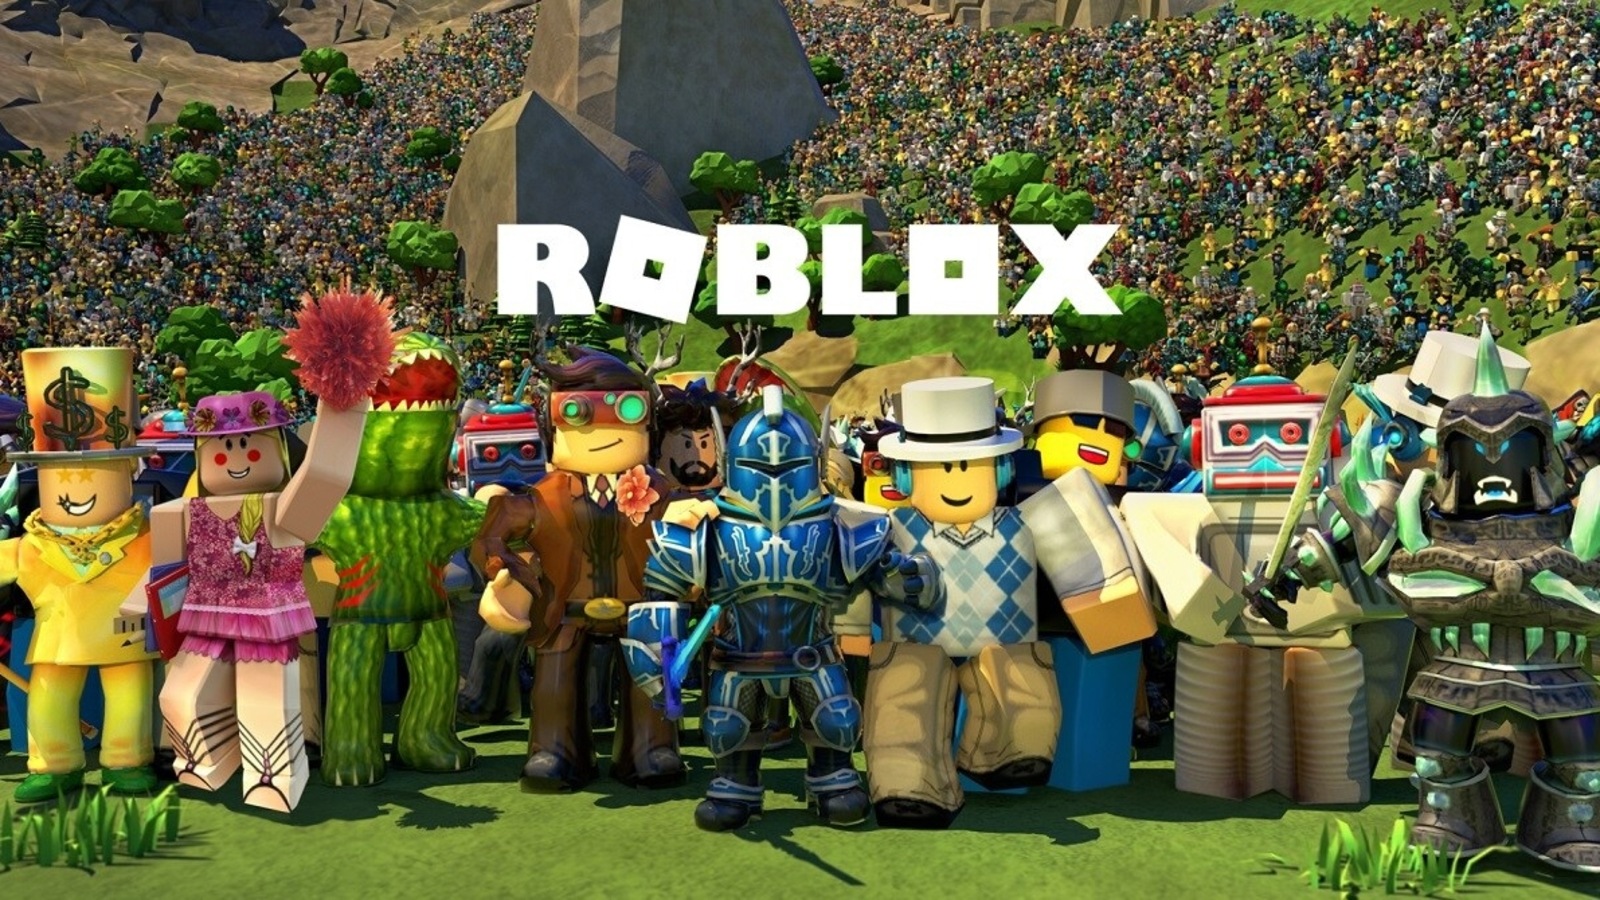 Why is My Child Obsessed with Roblox? - Kidas